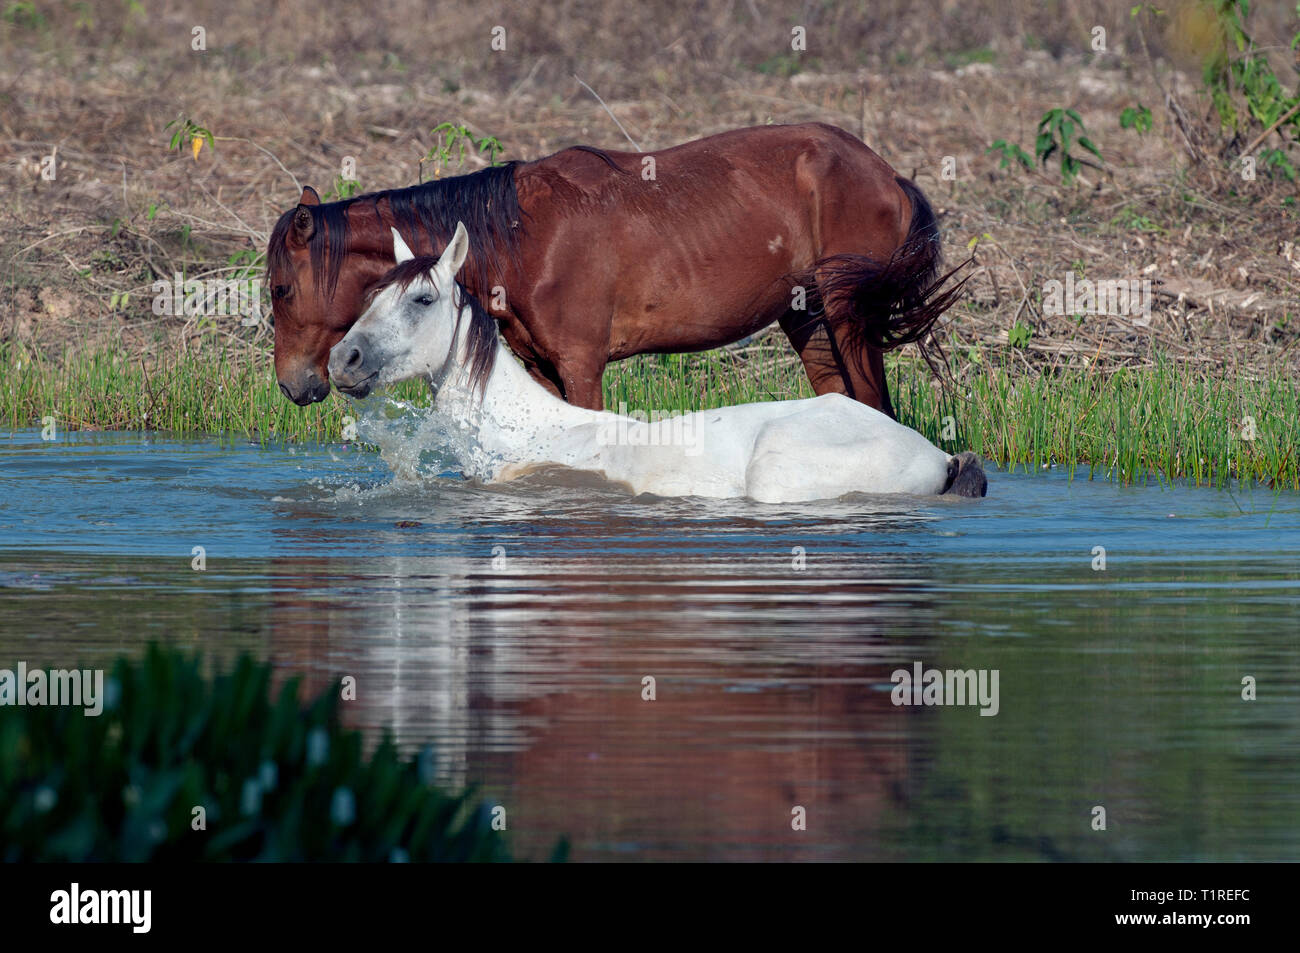 Two horses in a pond in The Pantanal in Brazil Stock Photo